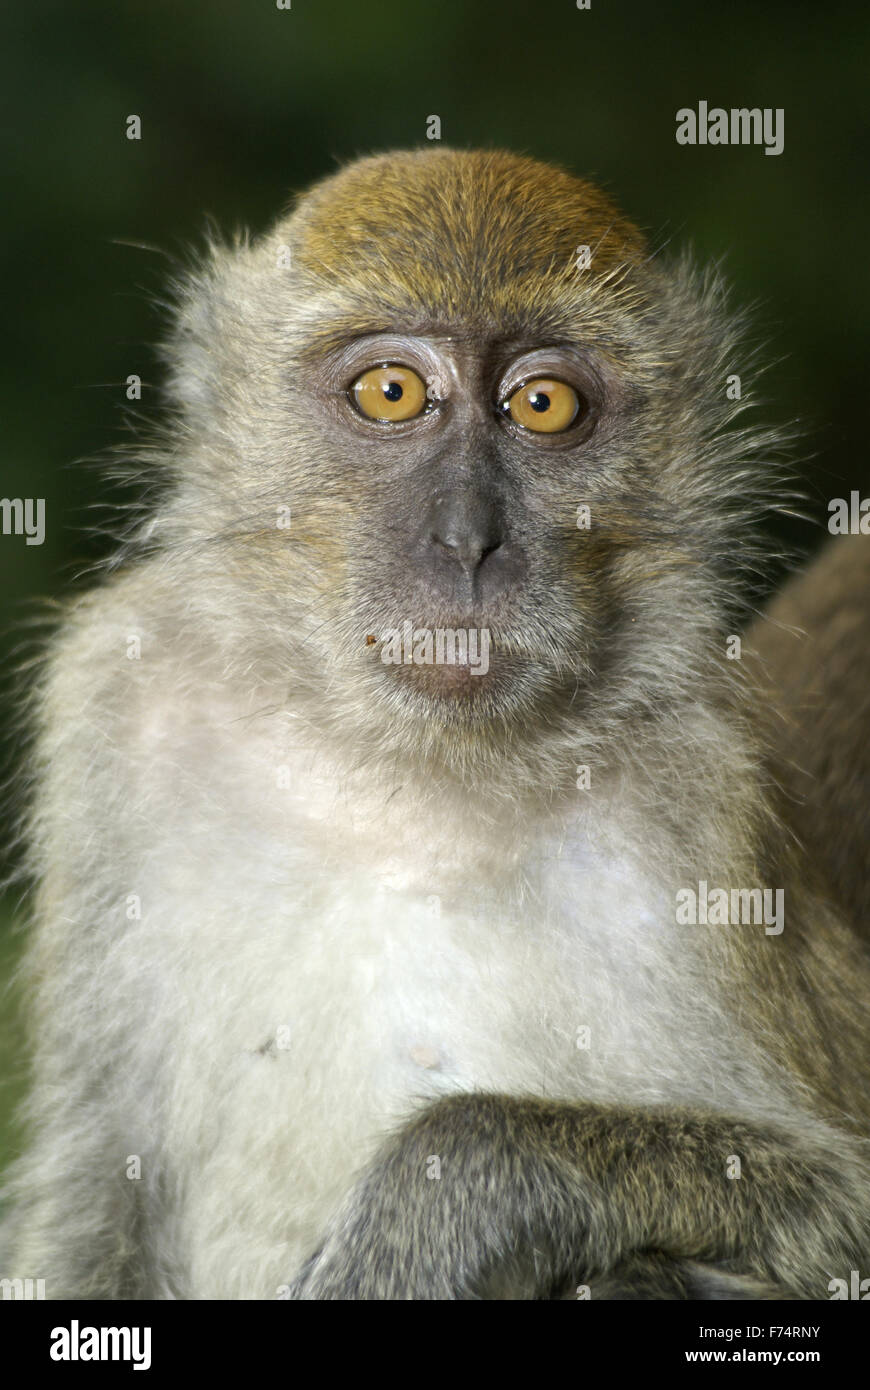 Bewildered macaque monkey expression Stock Photo